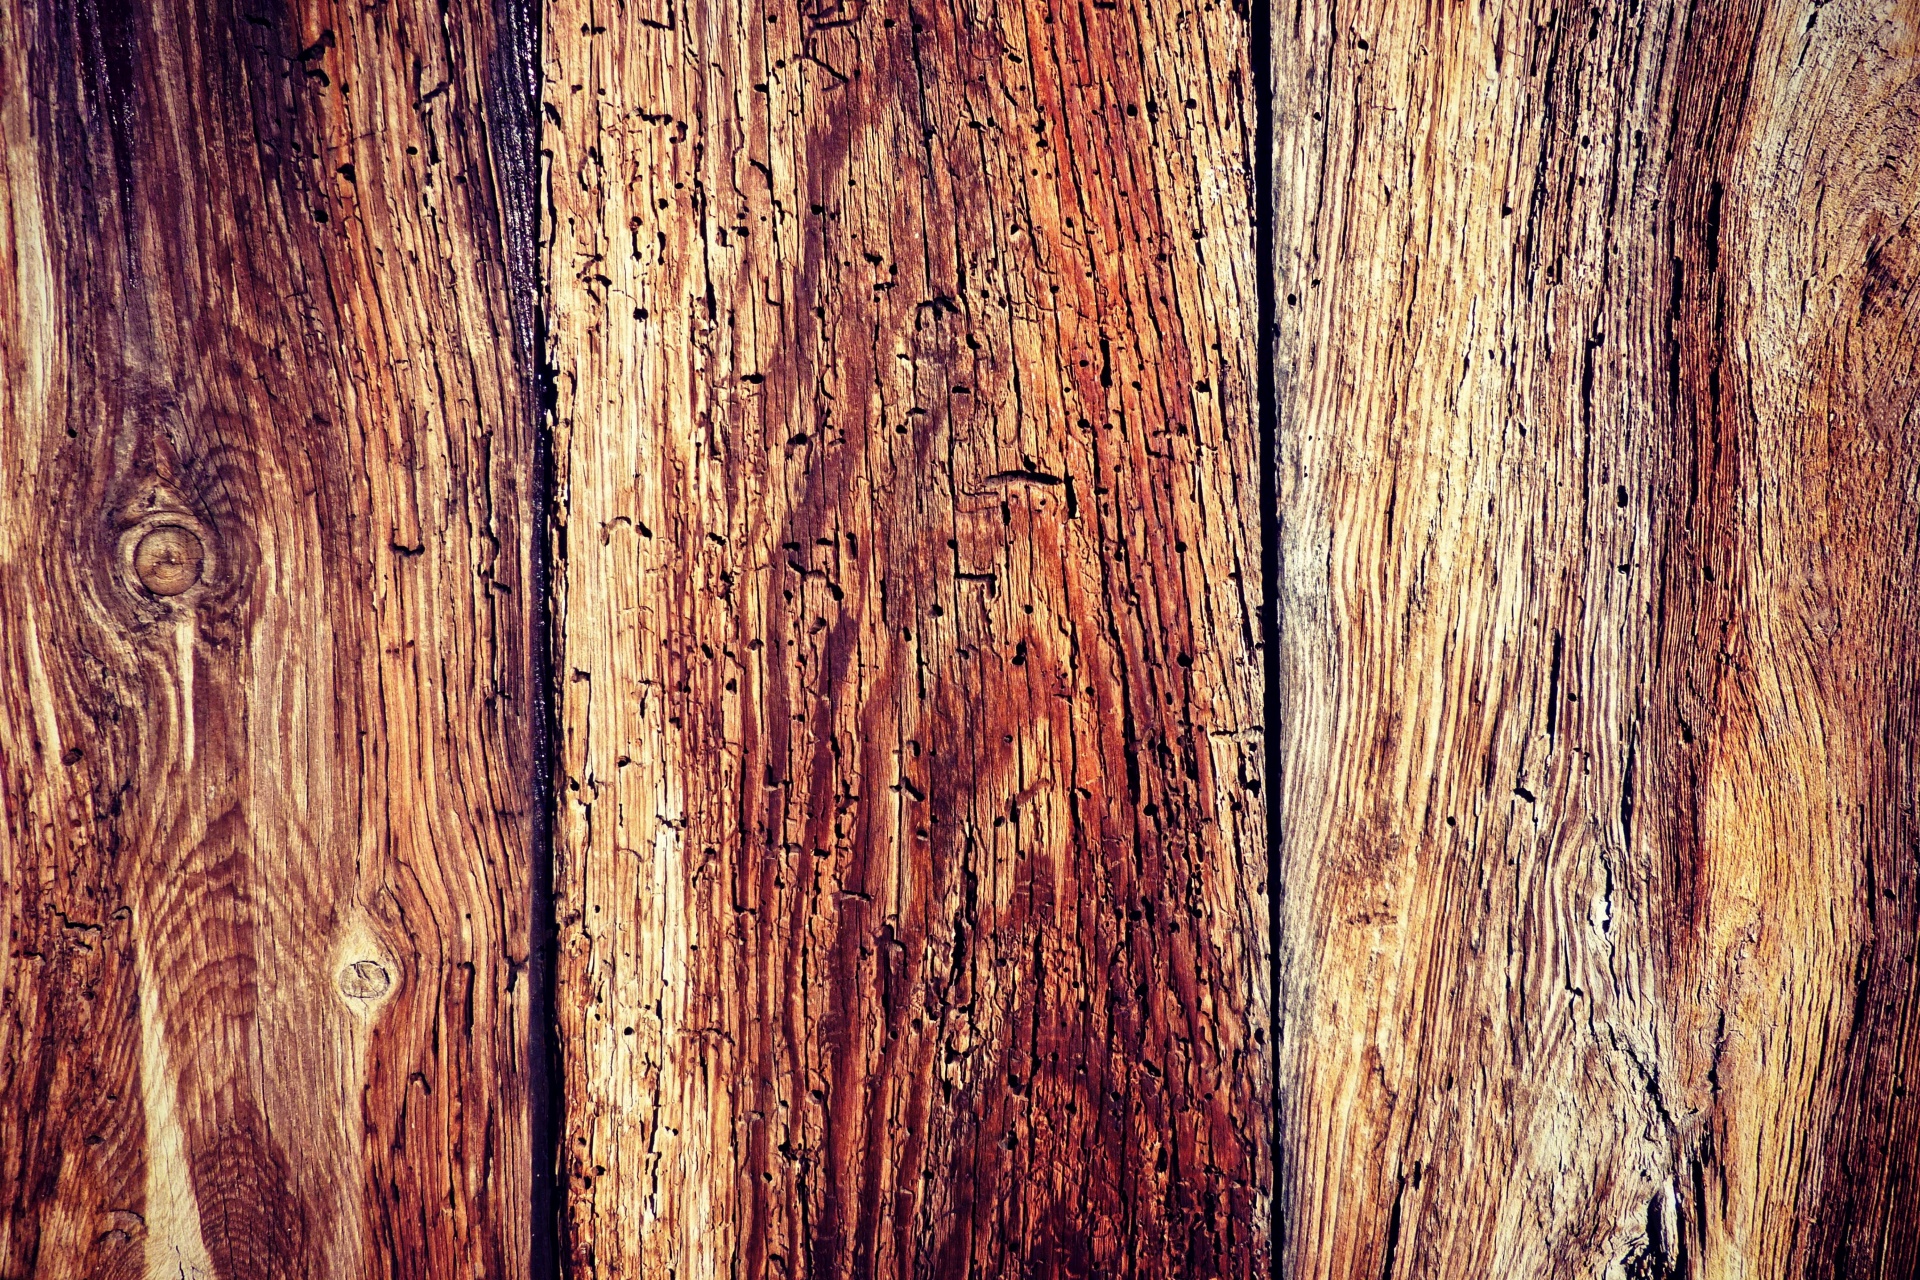 Fence Wood Background Free Photo - Wood Fencing Background - HD Wallpaper 